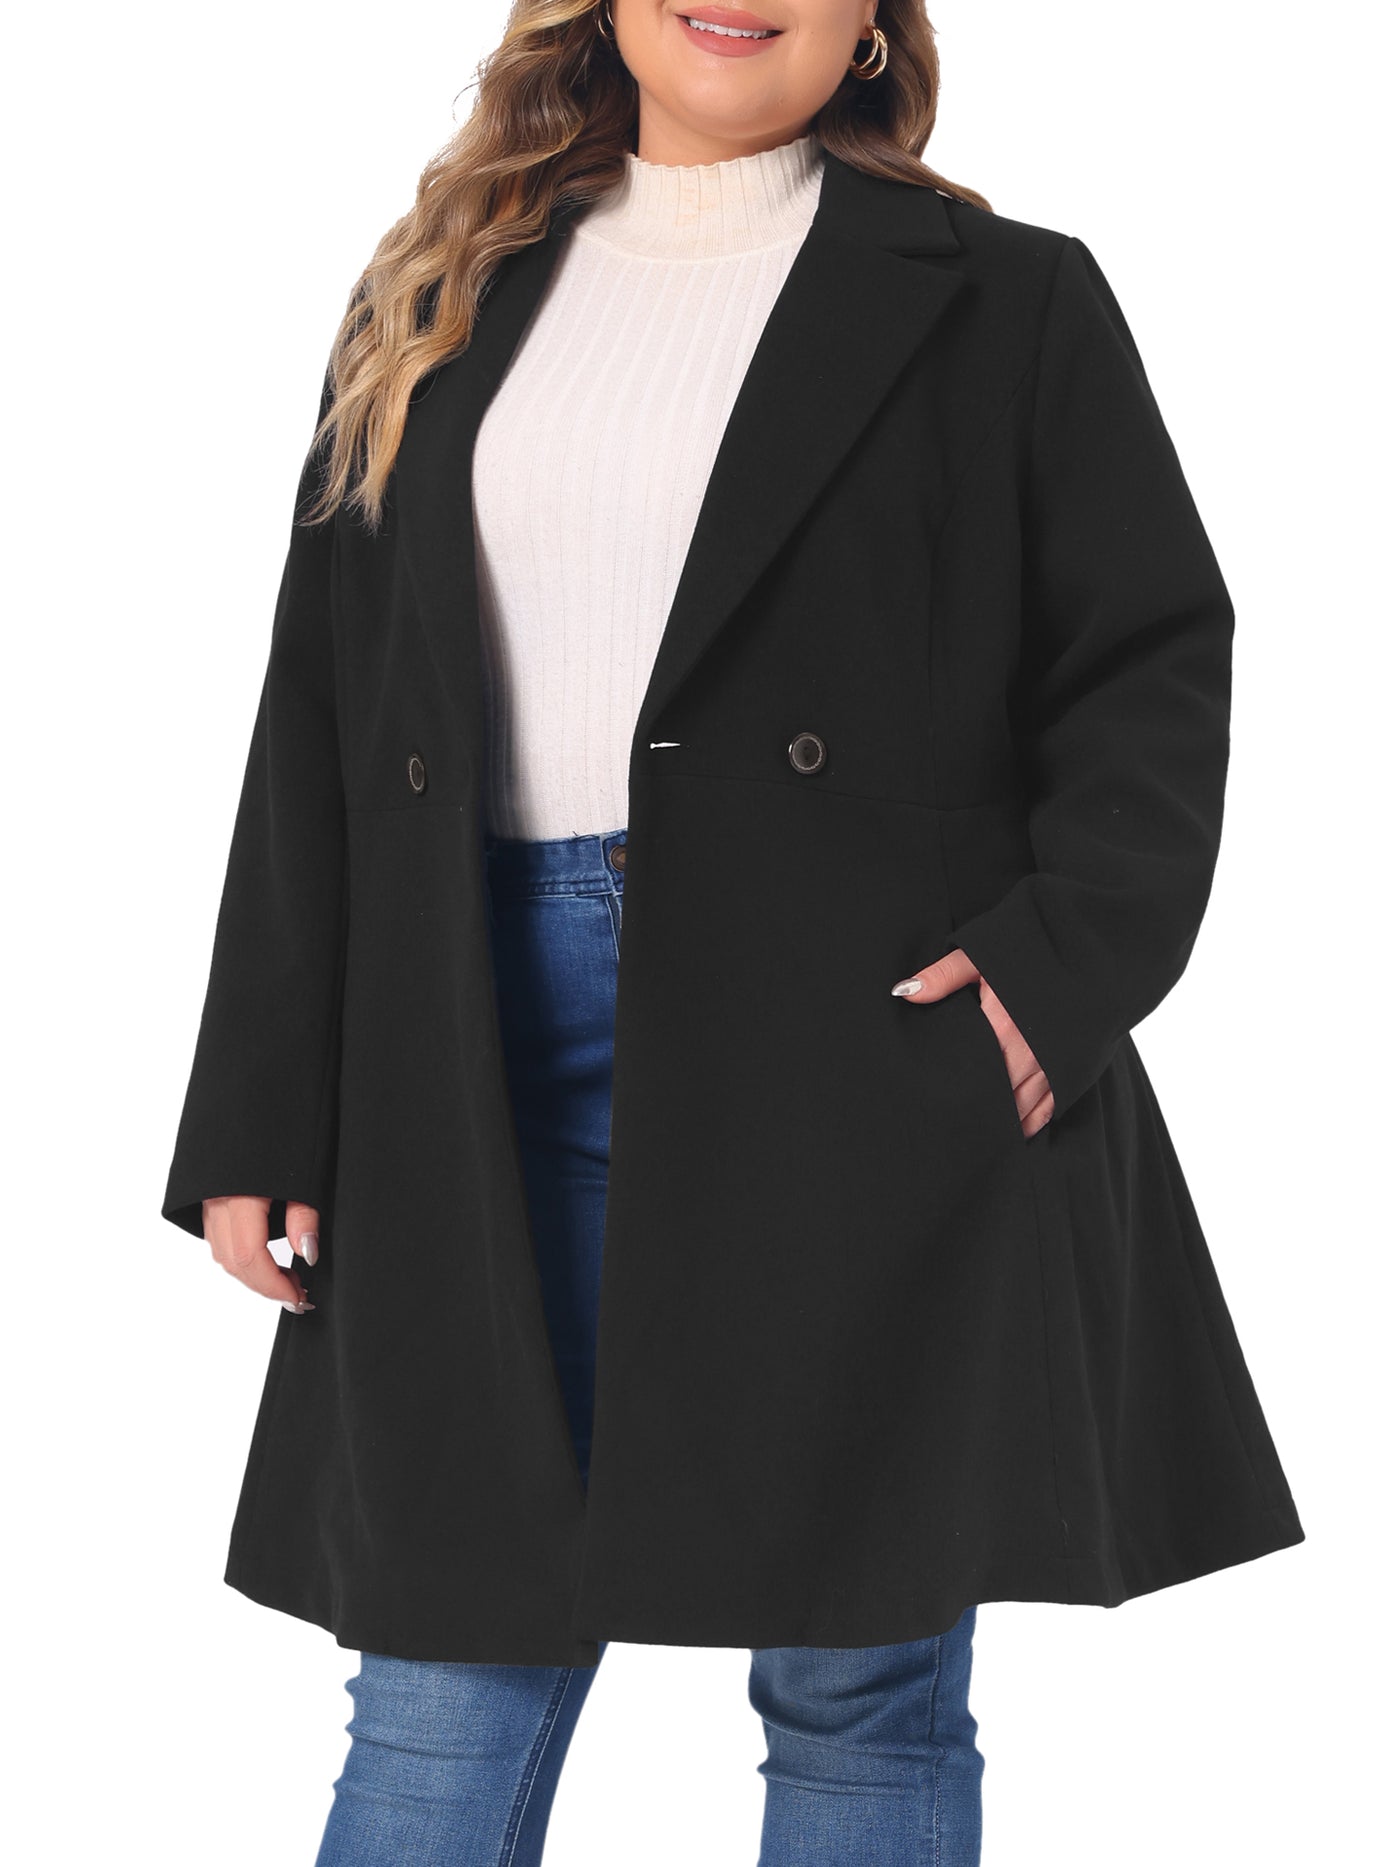 Bublédon Plus Size Peacoat for Women Elegant Notched Lapel Double Breasted Long Trench Coat